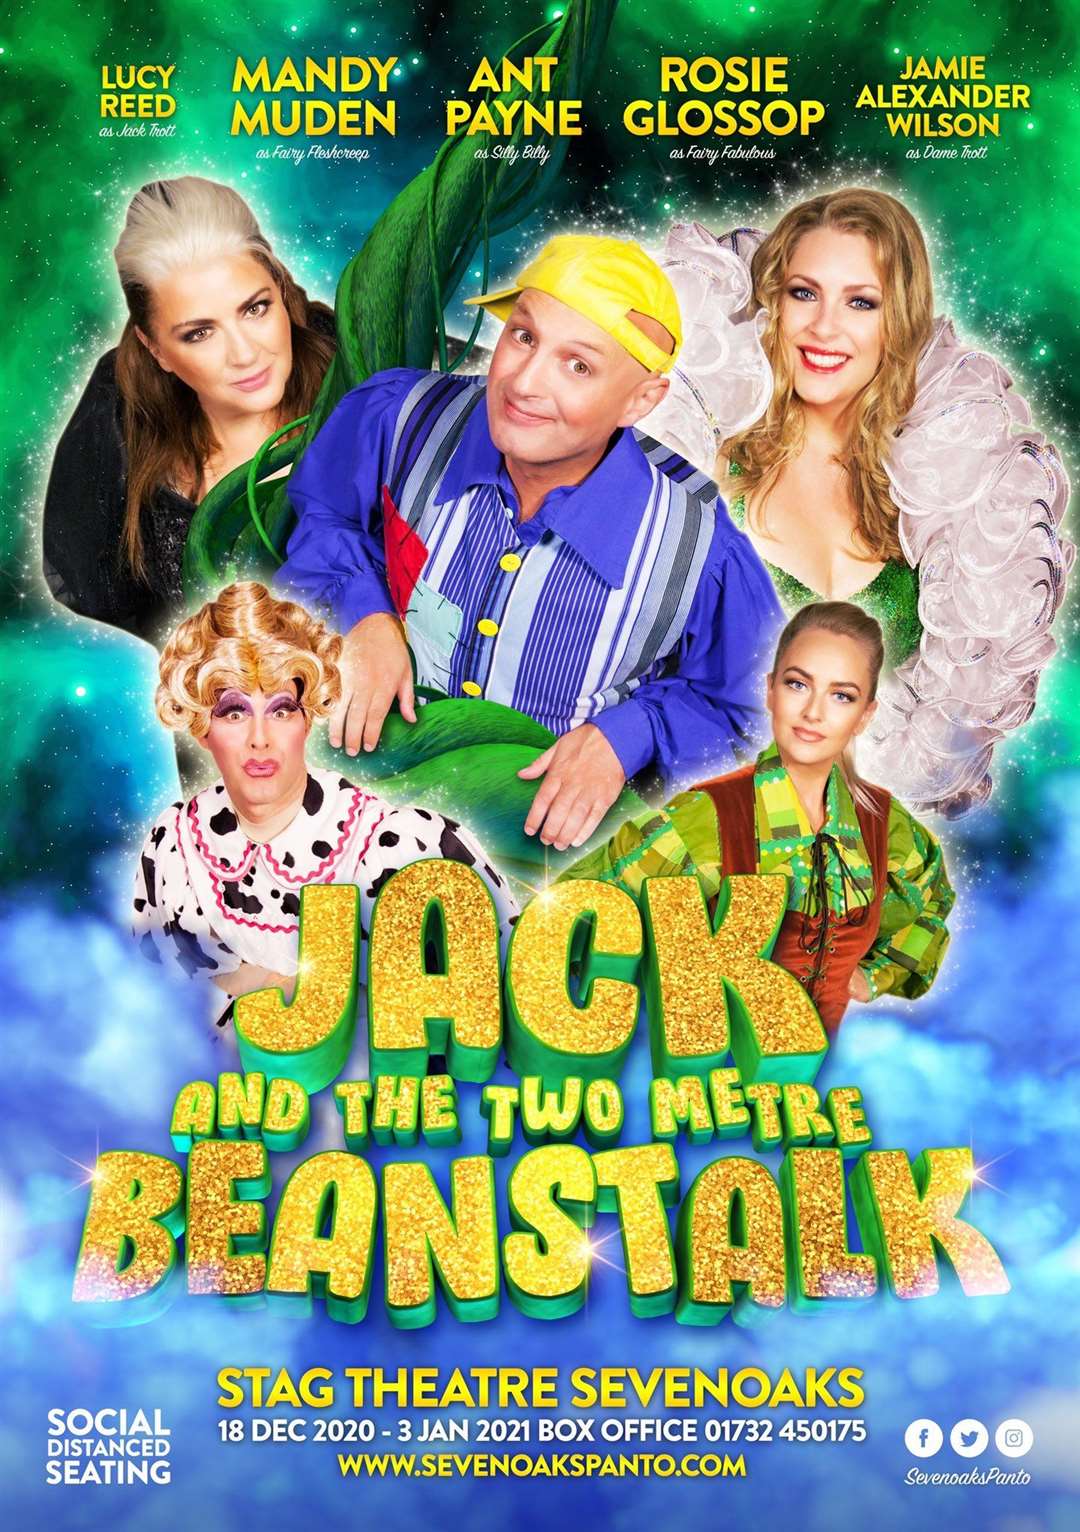 Jack And The Beanstalk is coming to the Stag Theatre in Sevenoaks this Christmas